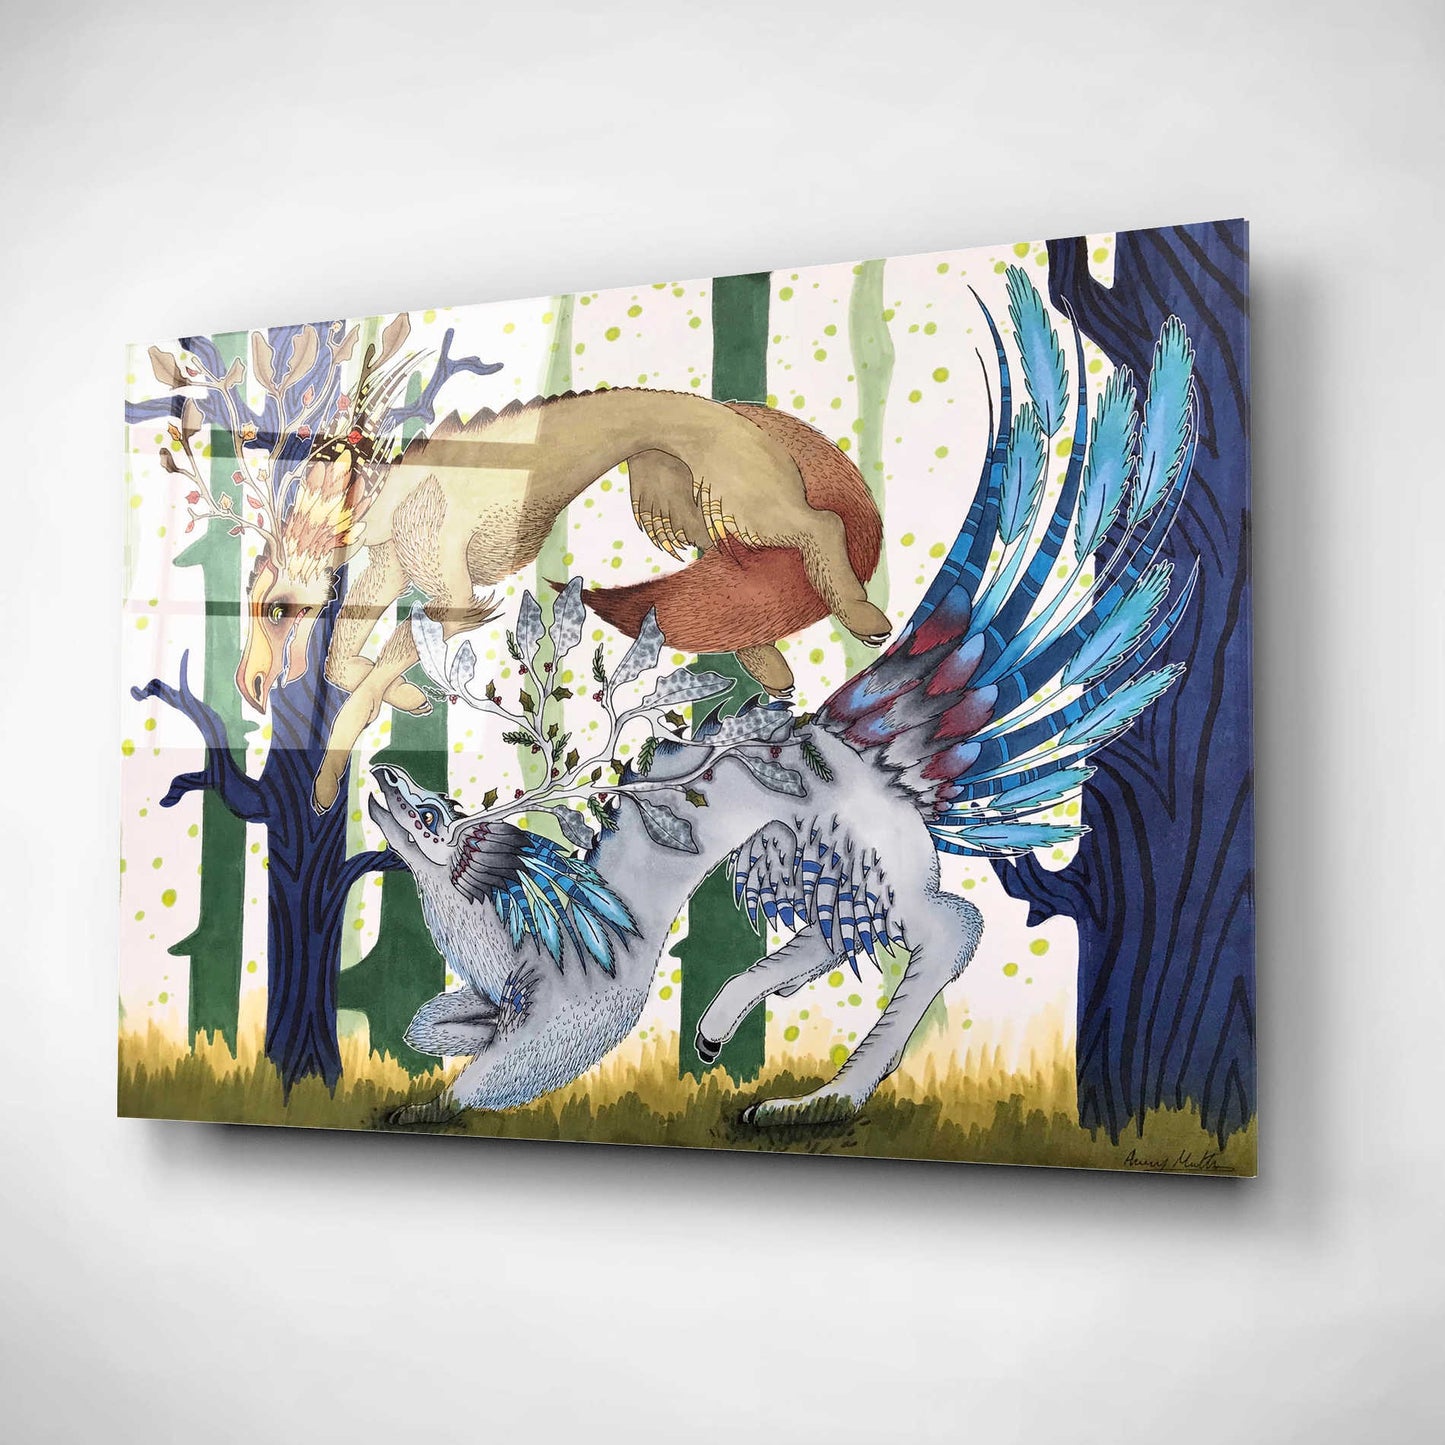 Epic Art 'The Chase' by Avery Multer, Acrylic Glass Wall Art,24x16